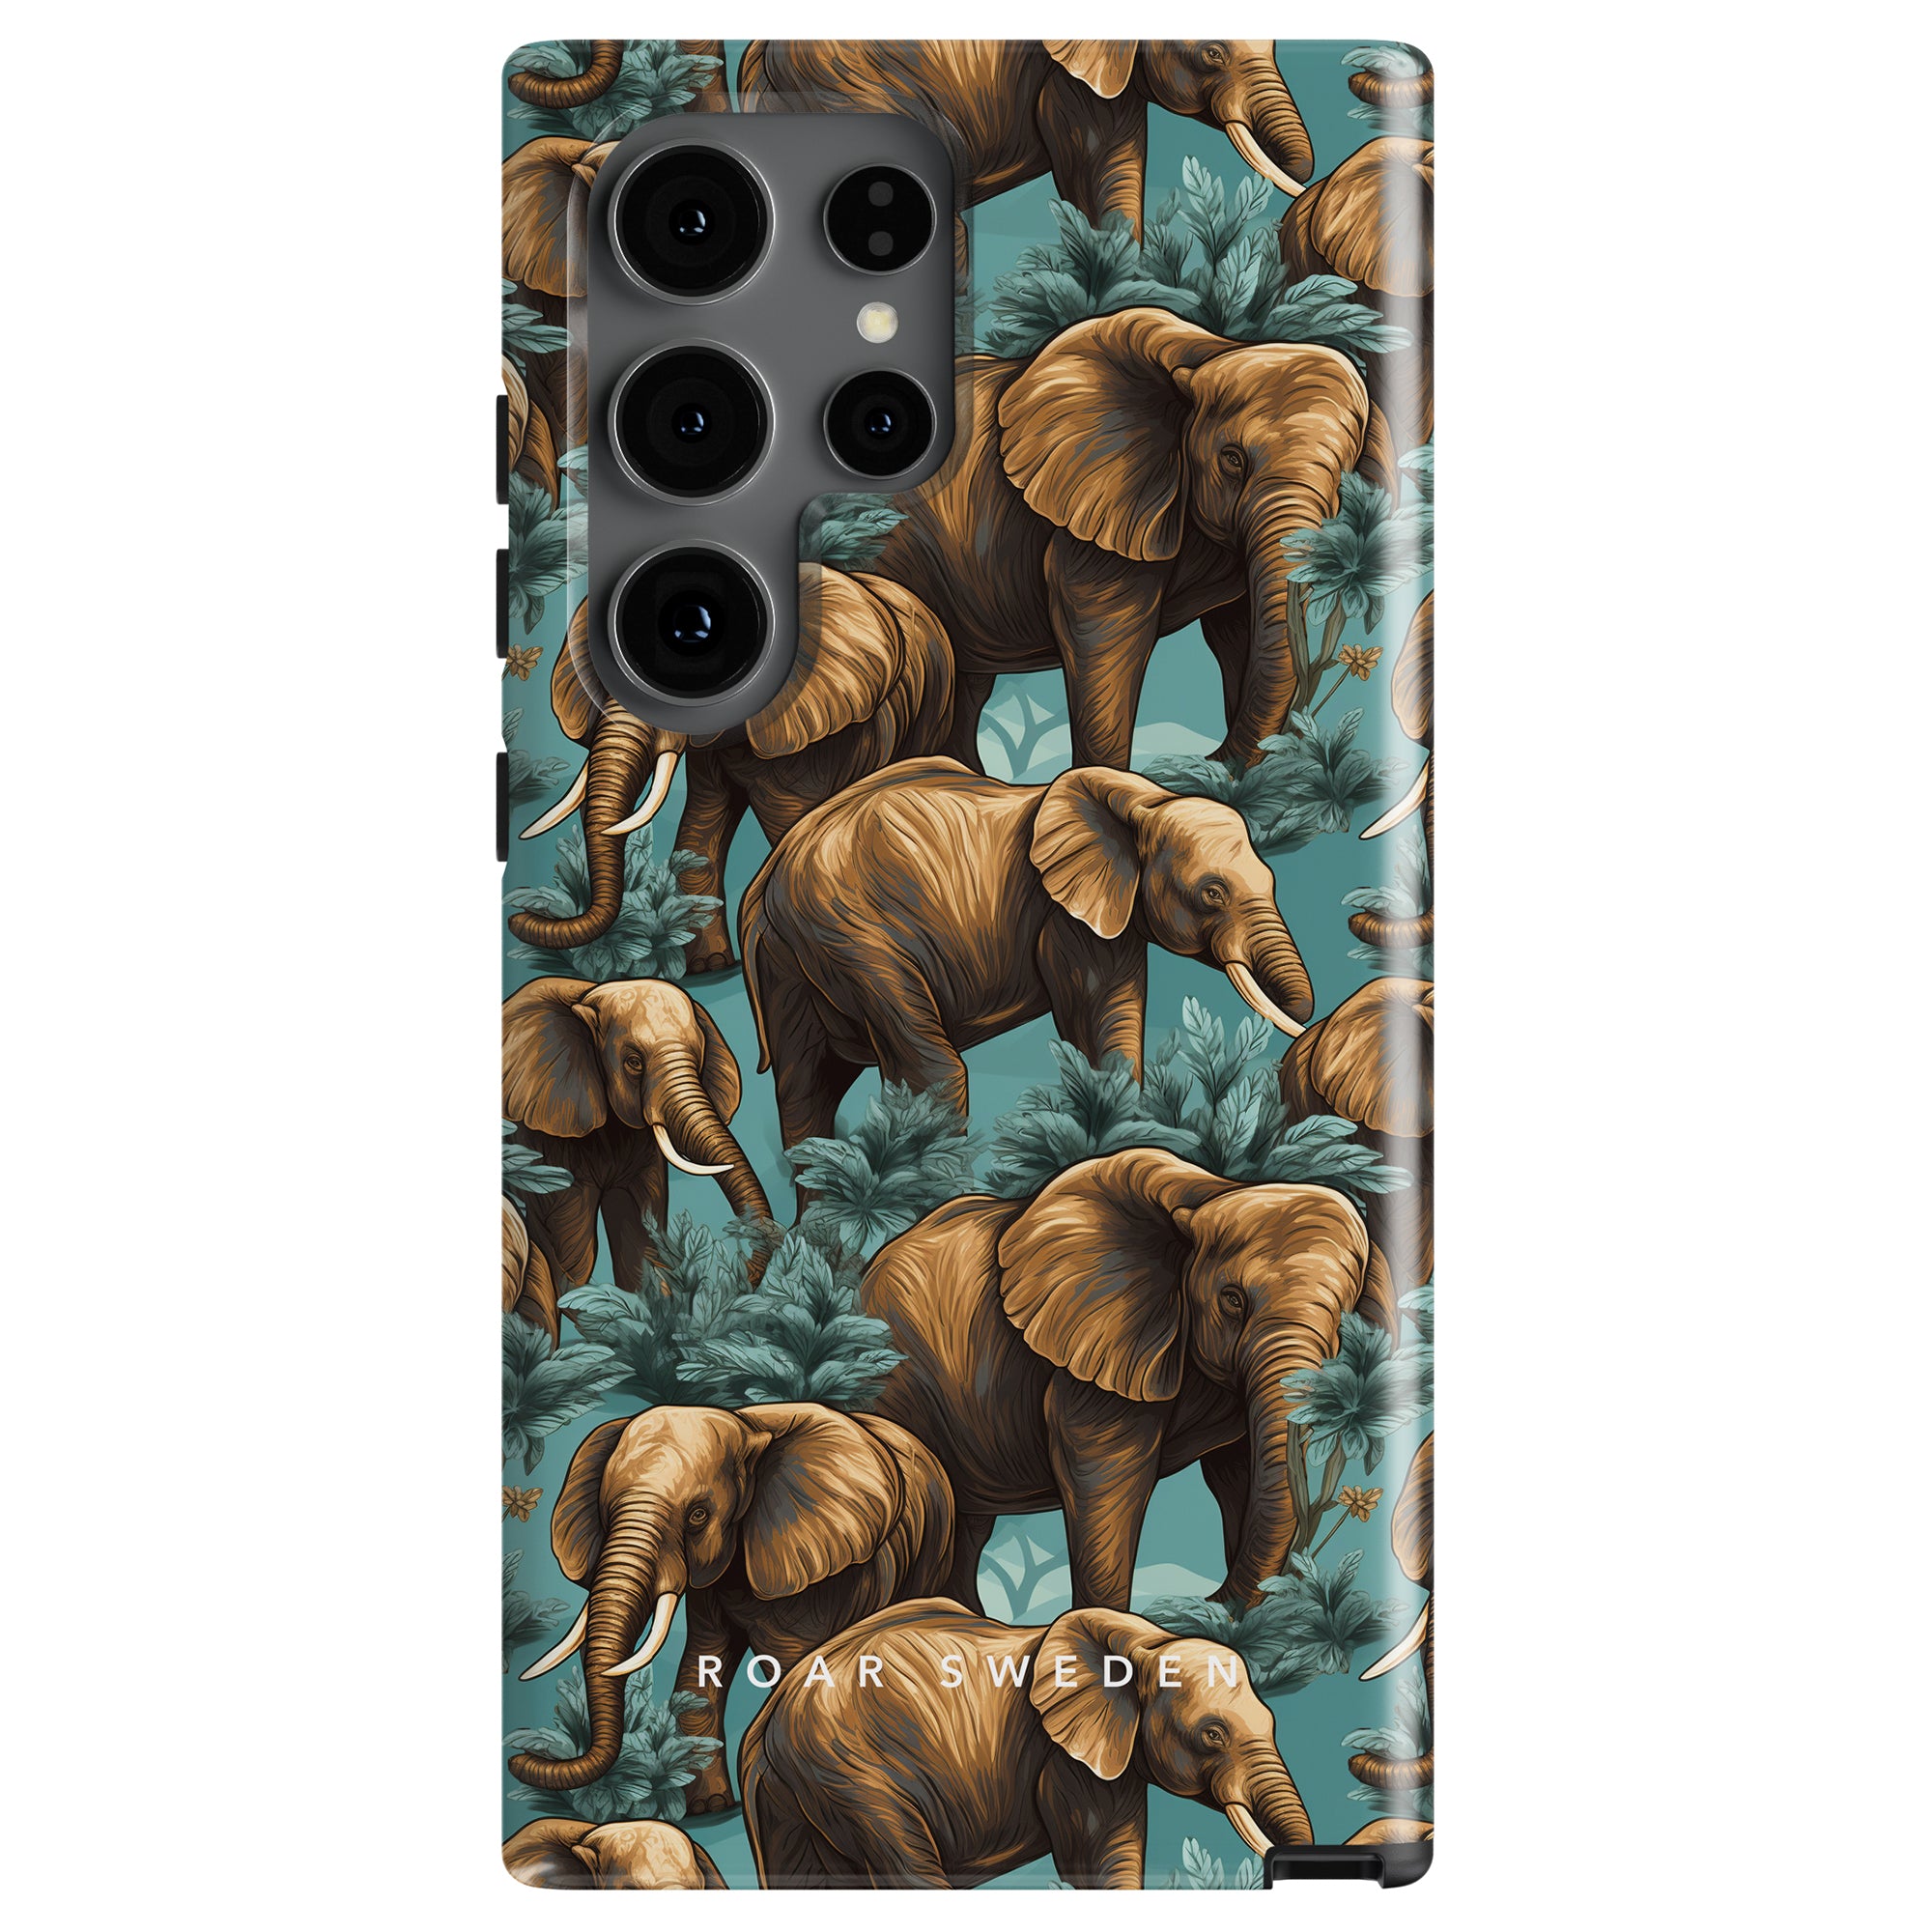 A Hathi - Tough Case from the Safari Collection featuring a detailed pattern of elefanter among tropical leaves on a teal background.